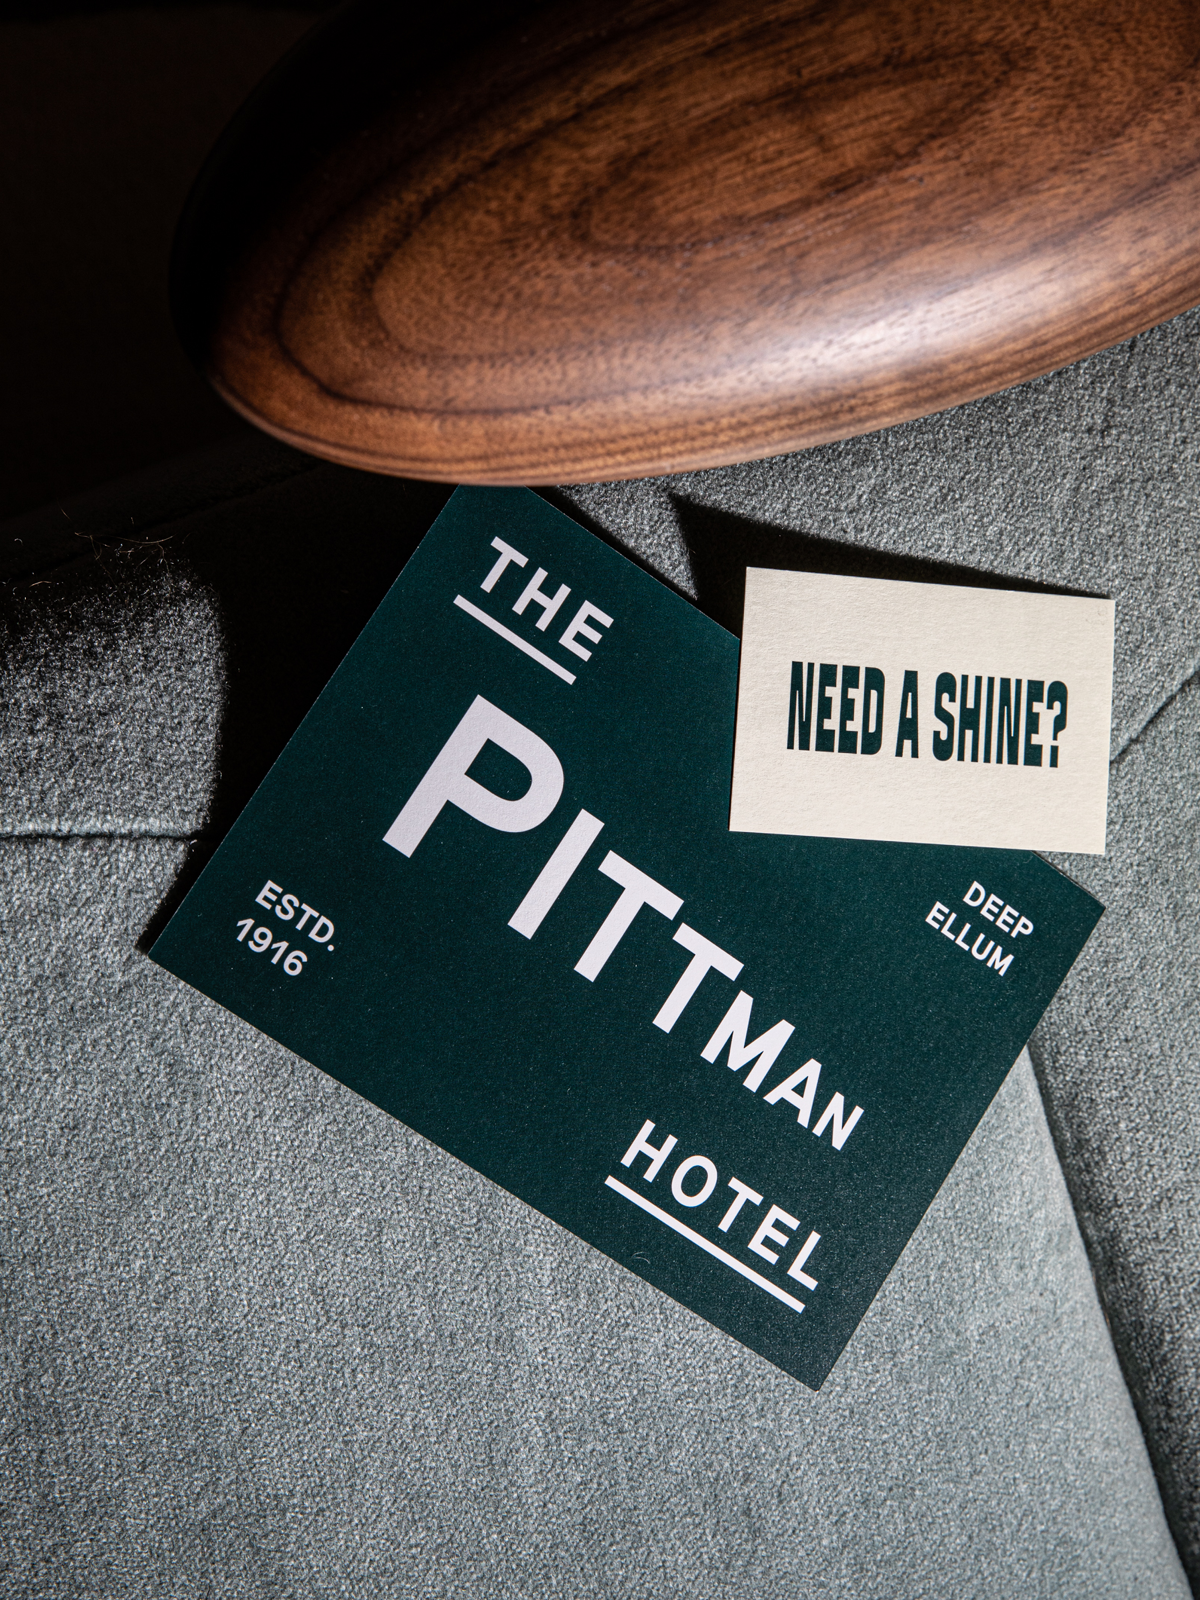 Cards from The Pittman Hotel in Dallas, TX